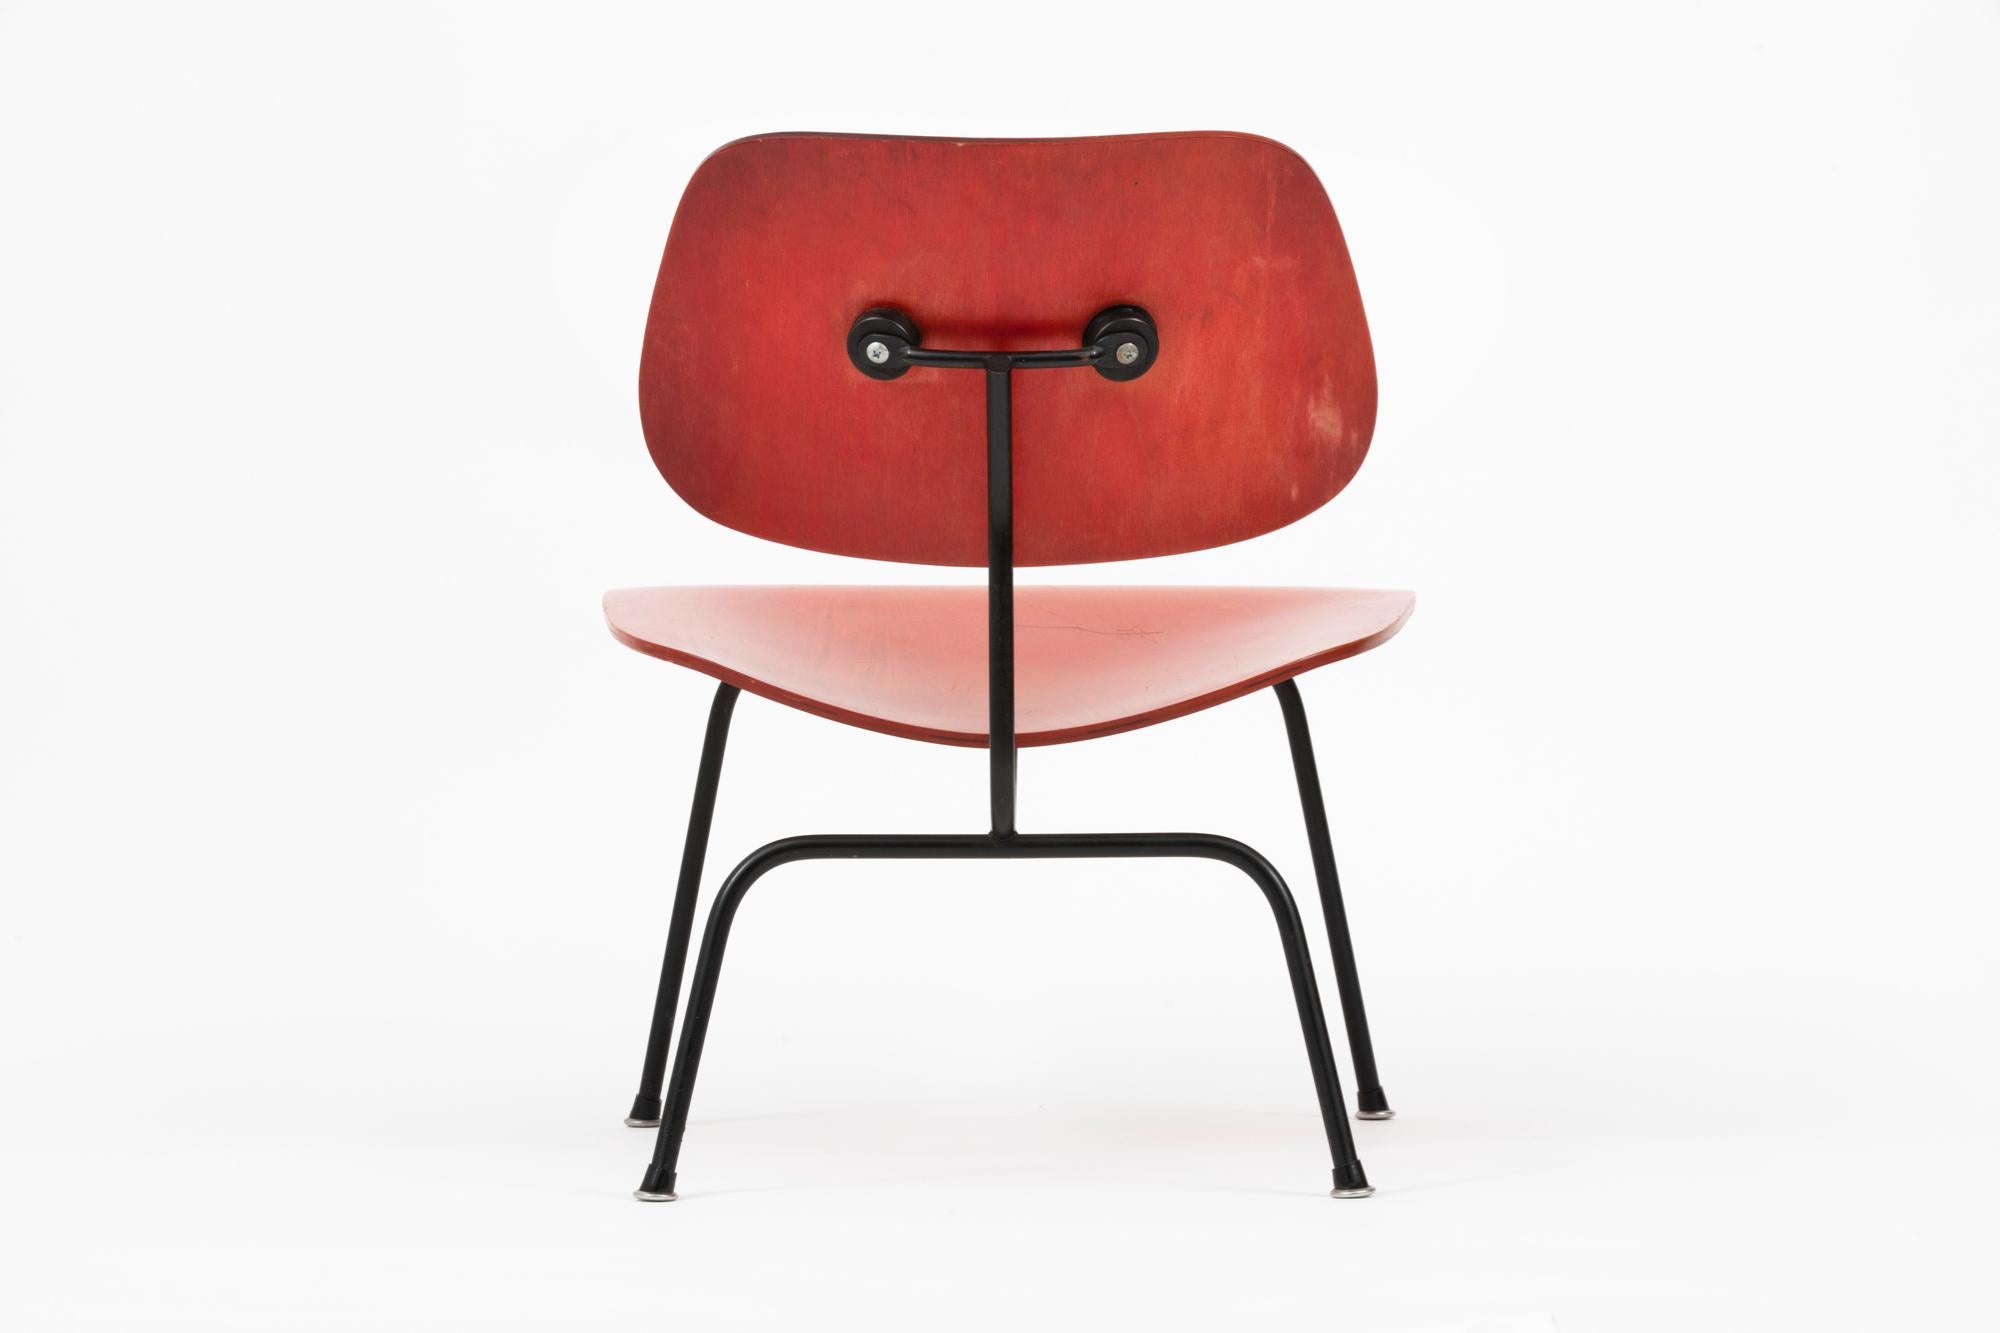 Dyed Red Aniline Plywood Charles & Ray Eames LCM Lounge Chair Chair